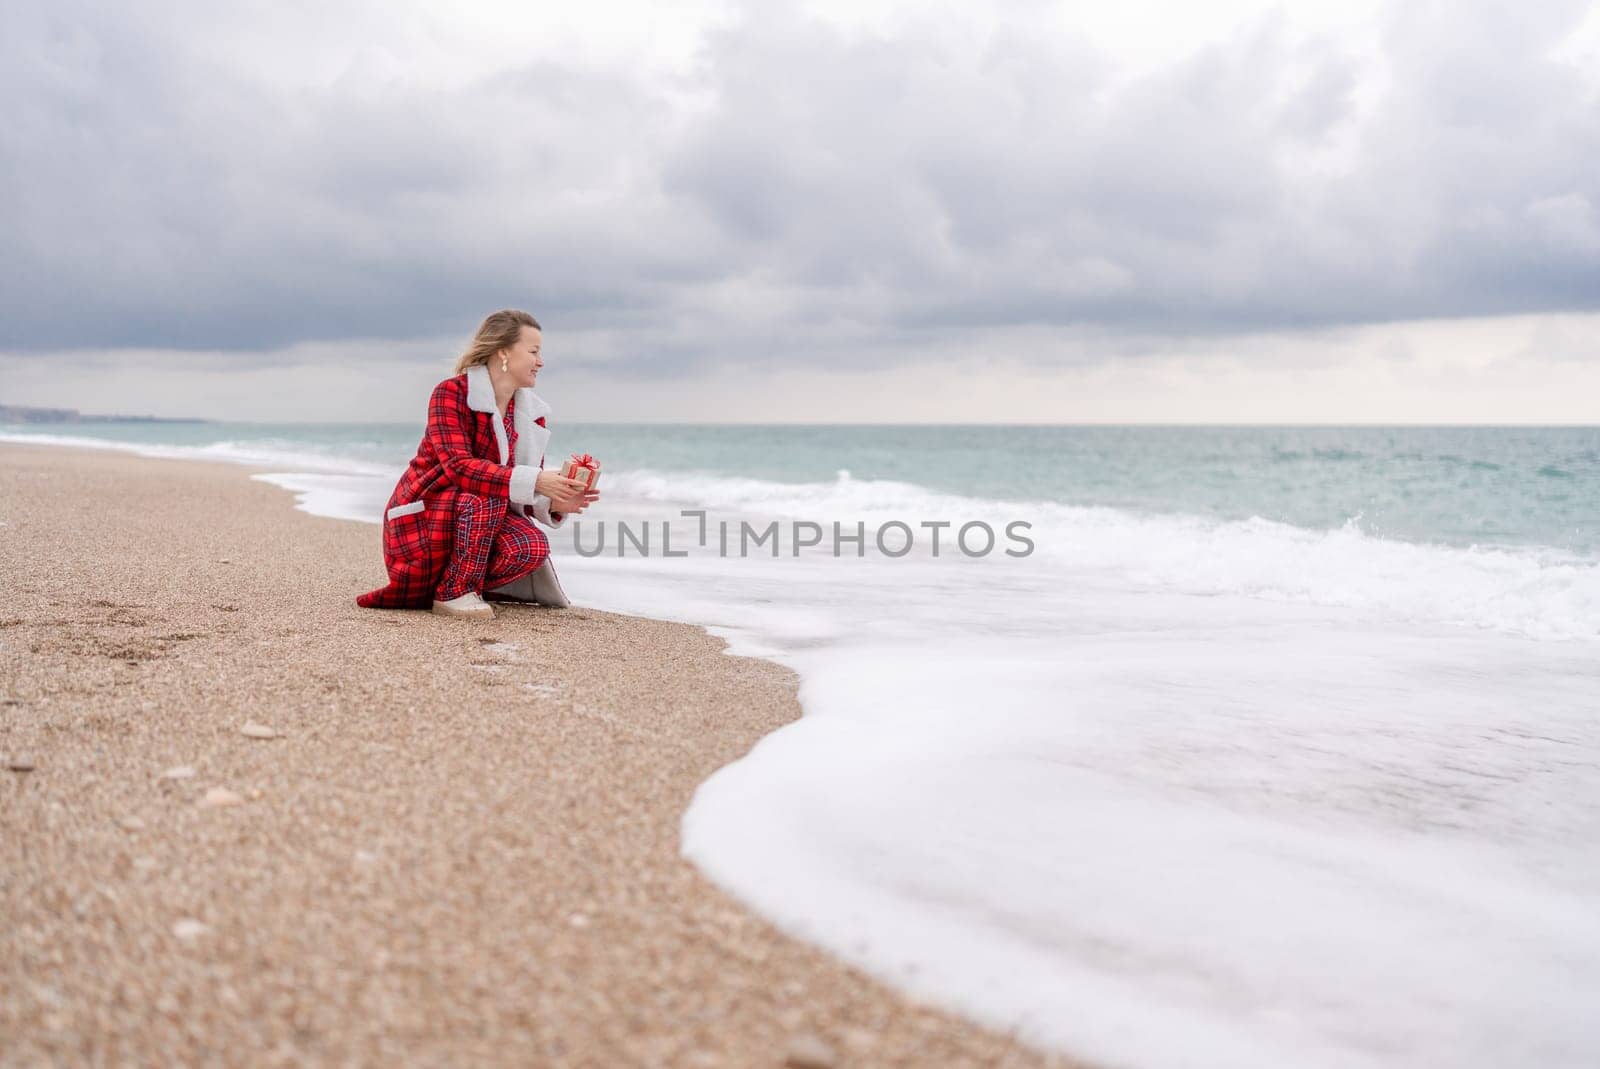 Lady in plaid shirt holding a gift in his hands enjoys beach with Christmas tree. Coastal area. Christmas, New Year holidays concep.